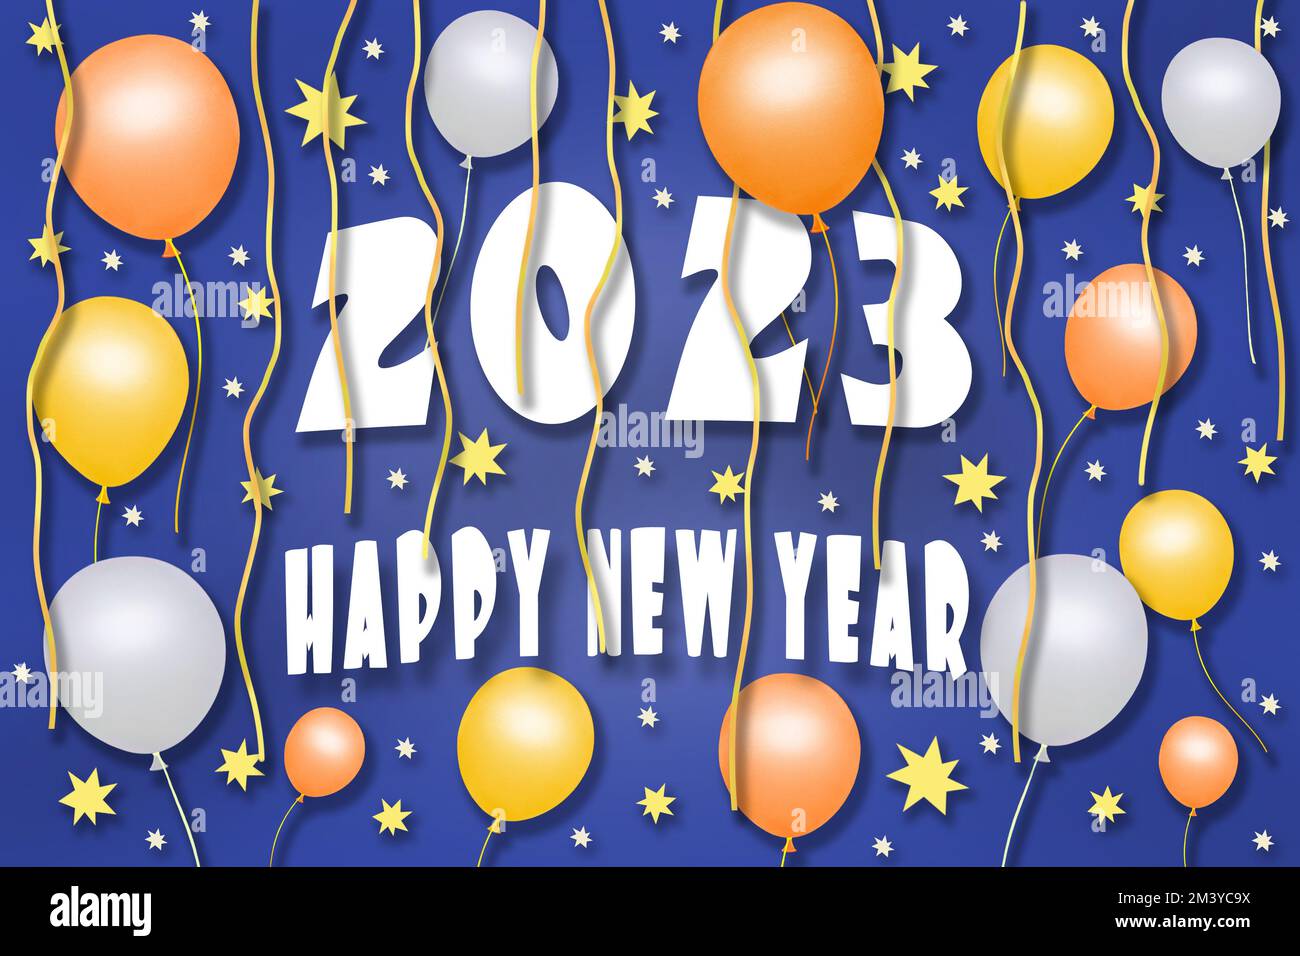 Illustration of Happy New Year 2023 paper craft greeting card Stock Photo